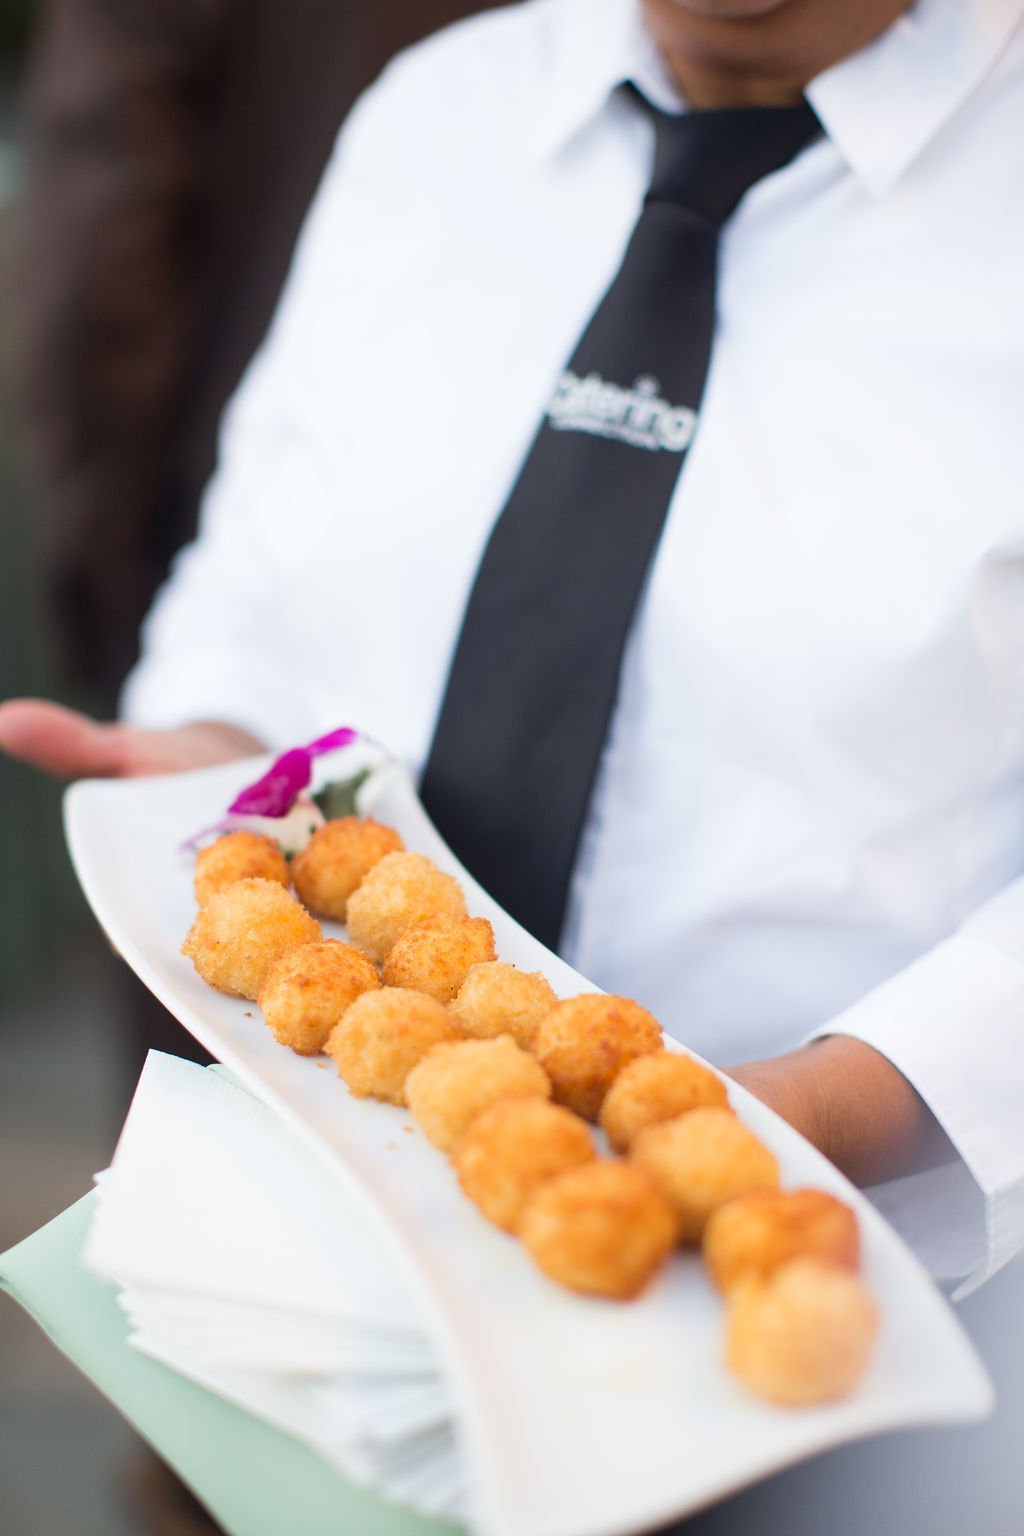 www.santabarbarawedding.com | Catering Connection | Sarita Relis Photography | Served Mac and Cheese Balls